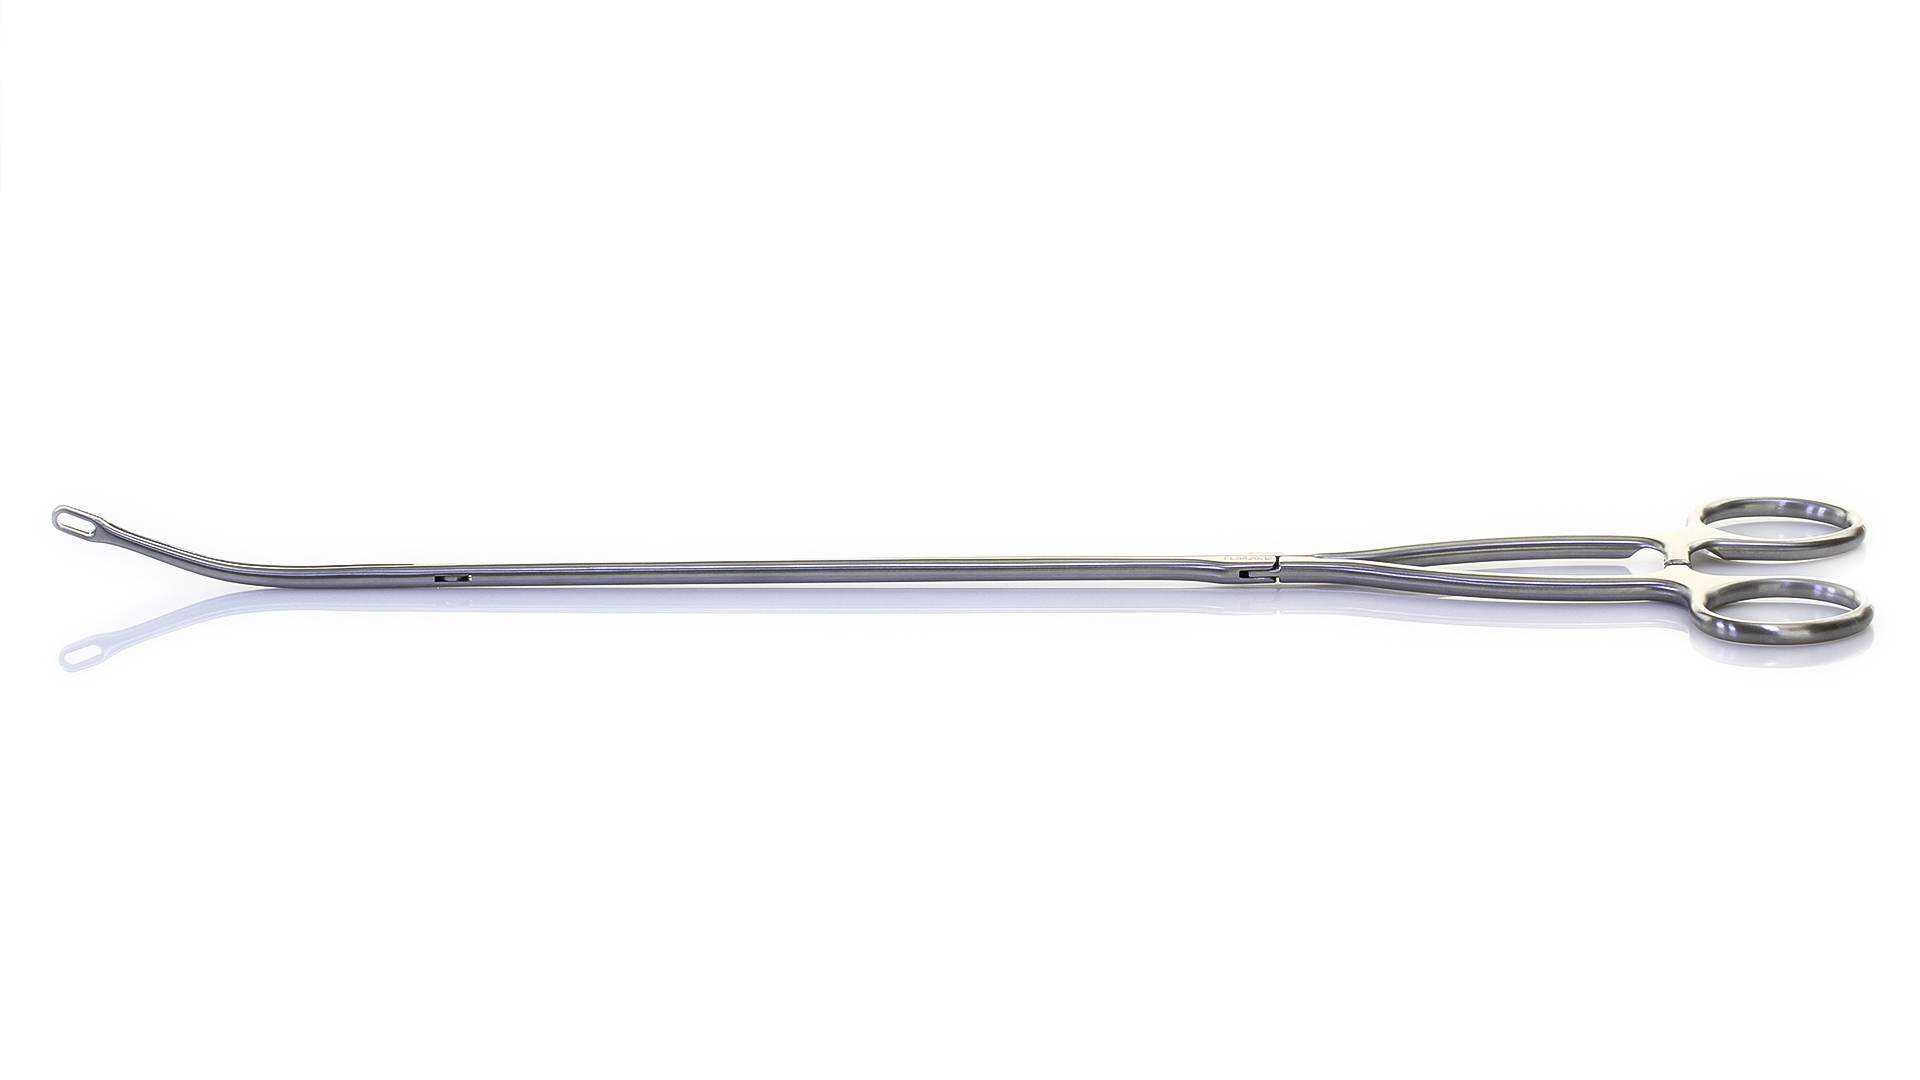 VATS Node Grasping Forceps - Curved Left 11mm Oblong Serrated jaws